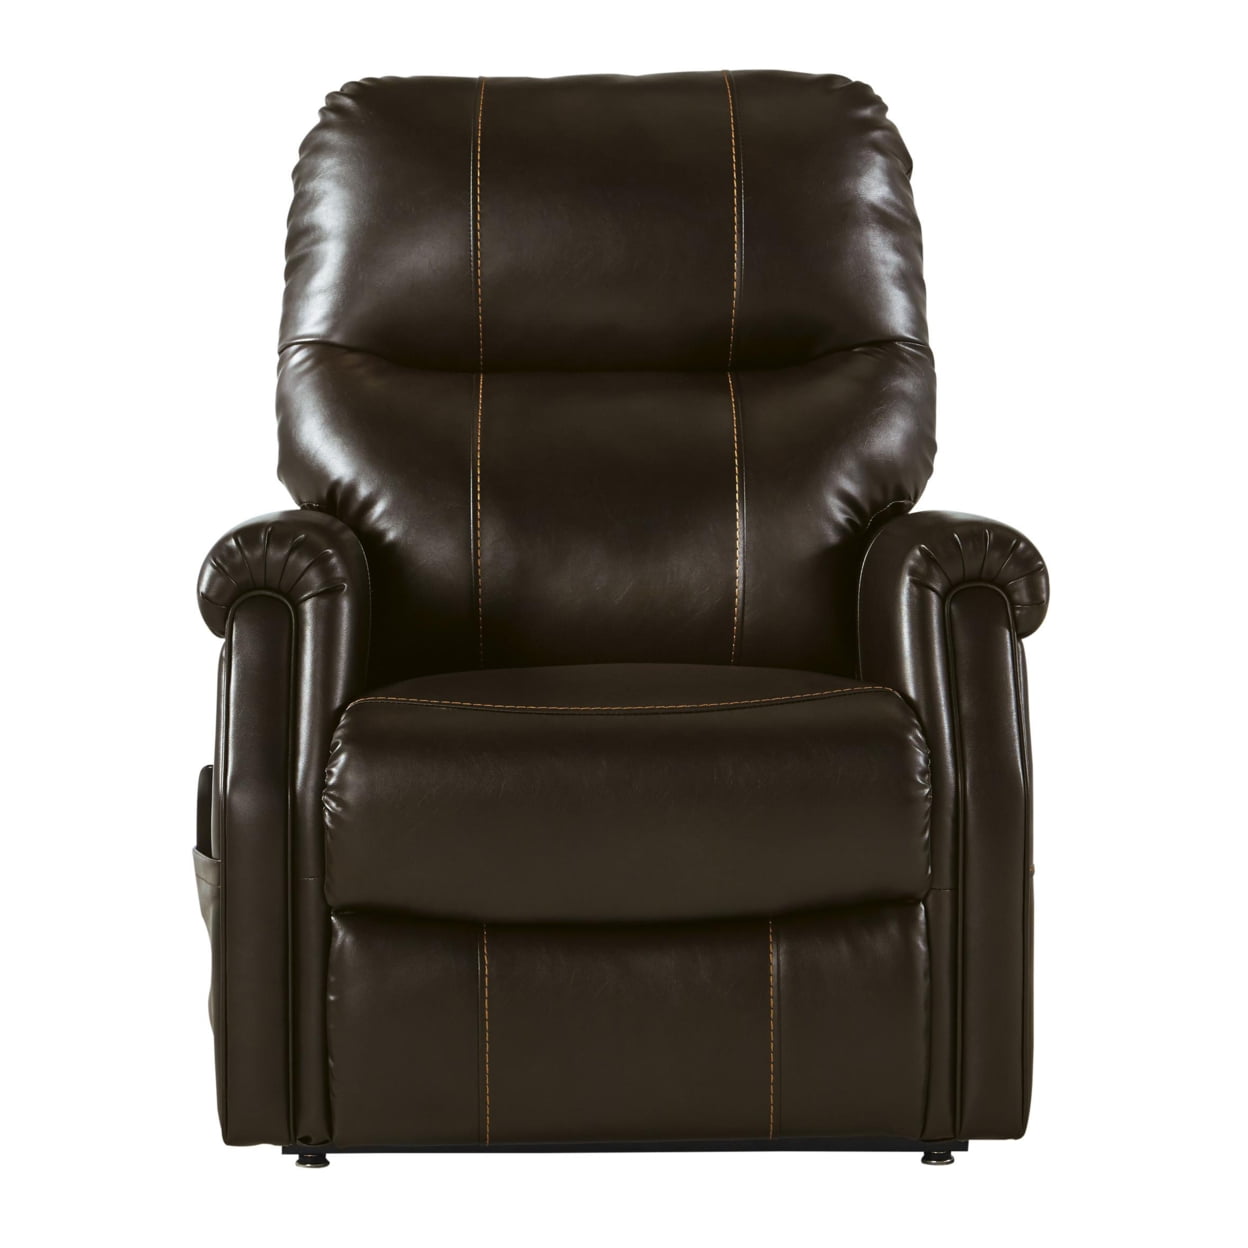 39.25 x 30 x 35.25 in. Leatherette Metal Frame Power Lift Recliner with Tufted Back, Brown -  DeluxDesigns, DE2807979